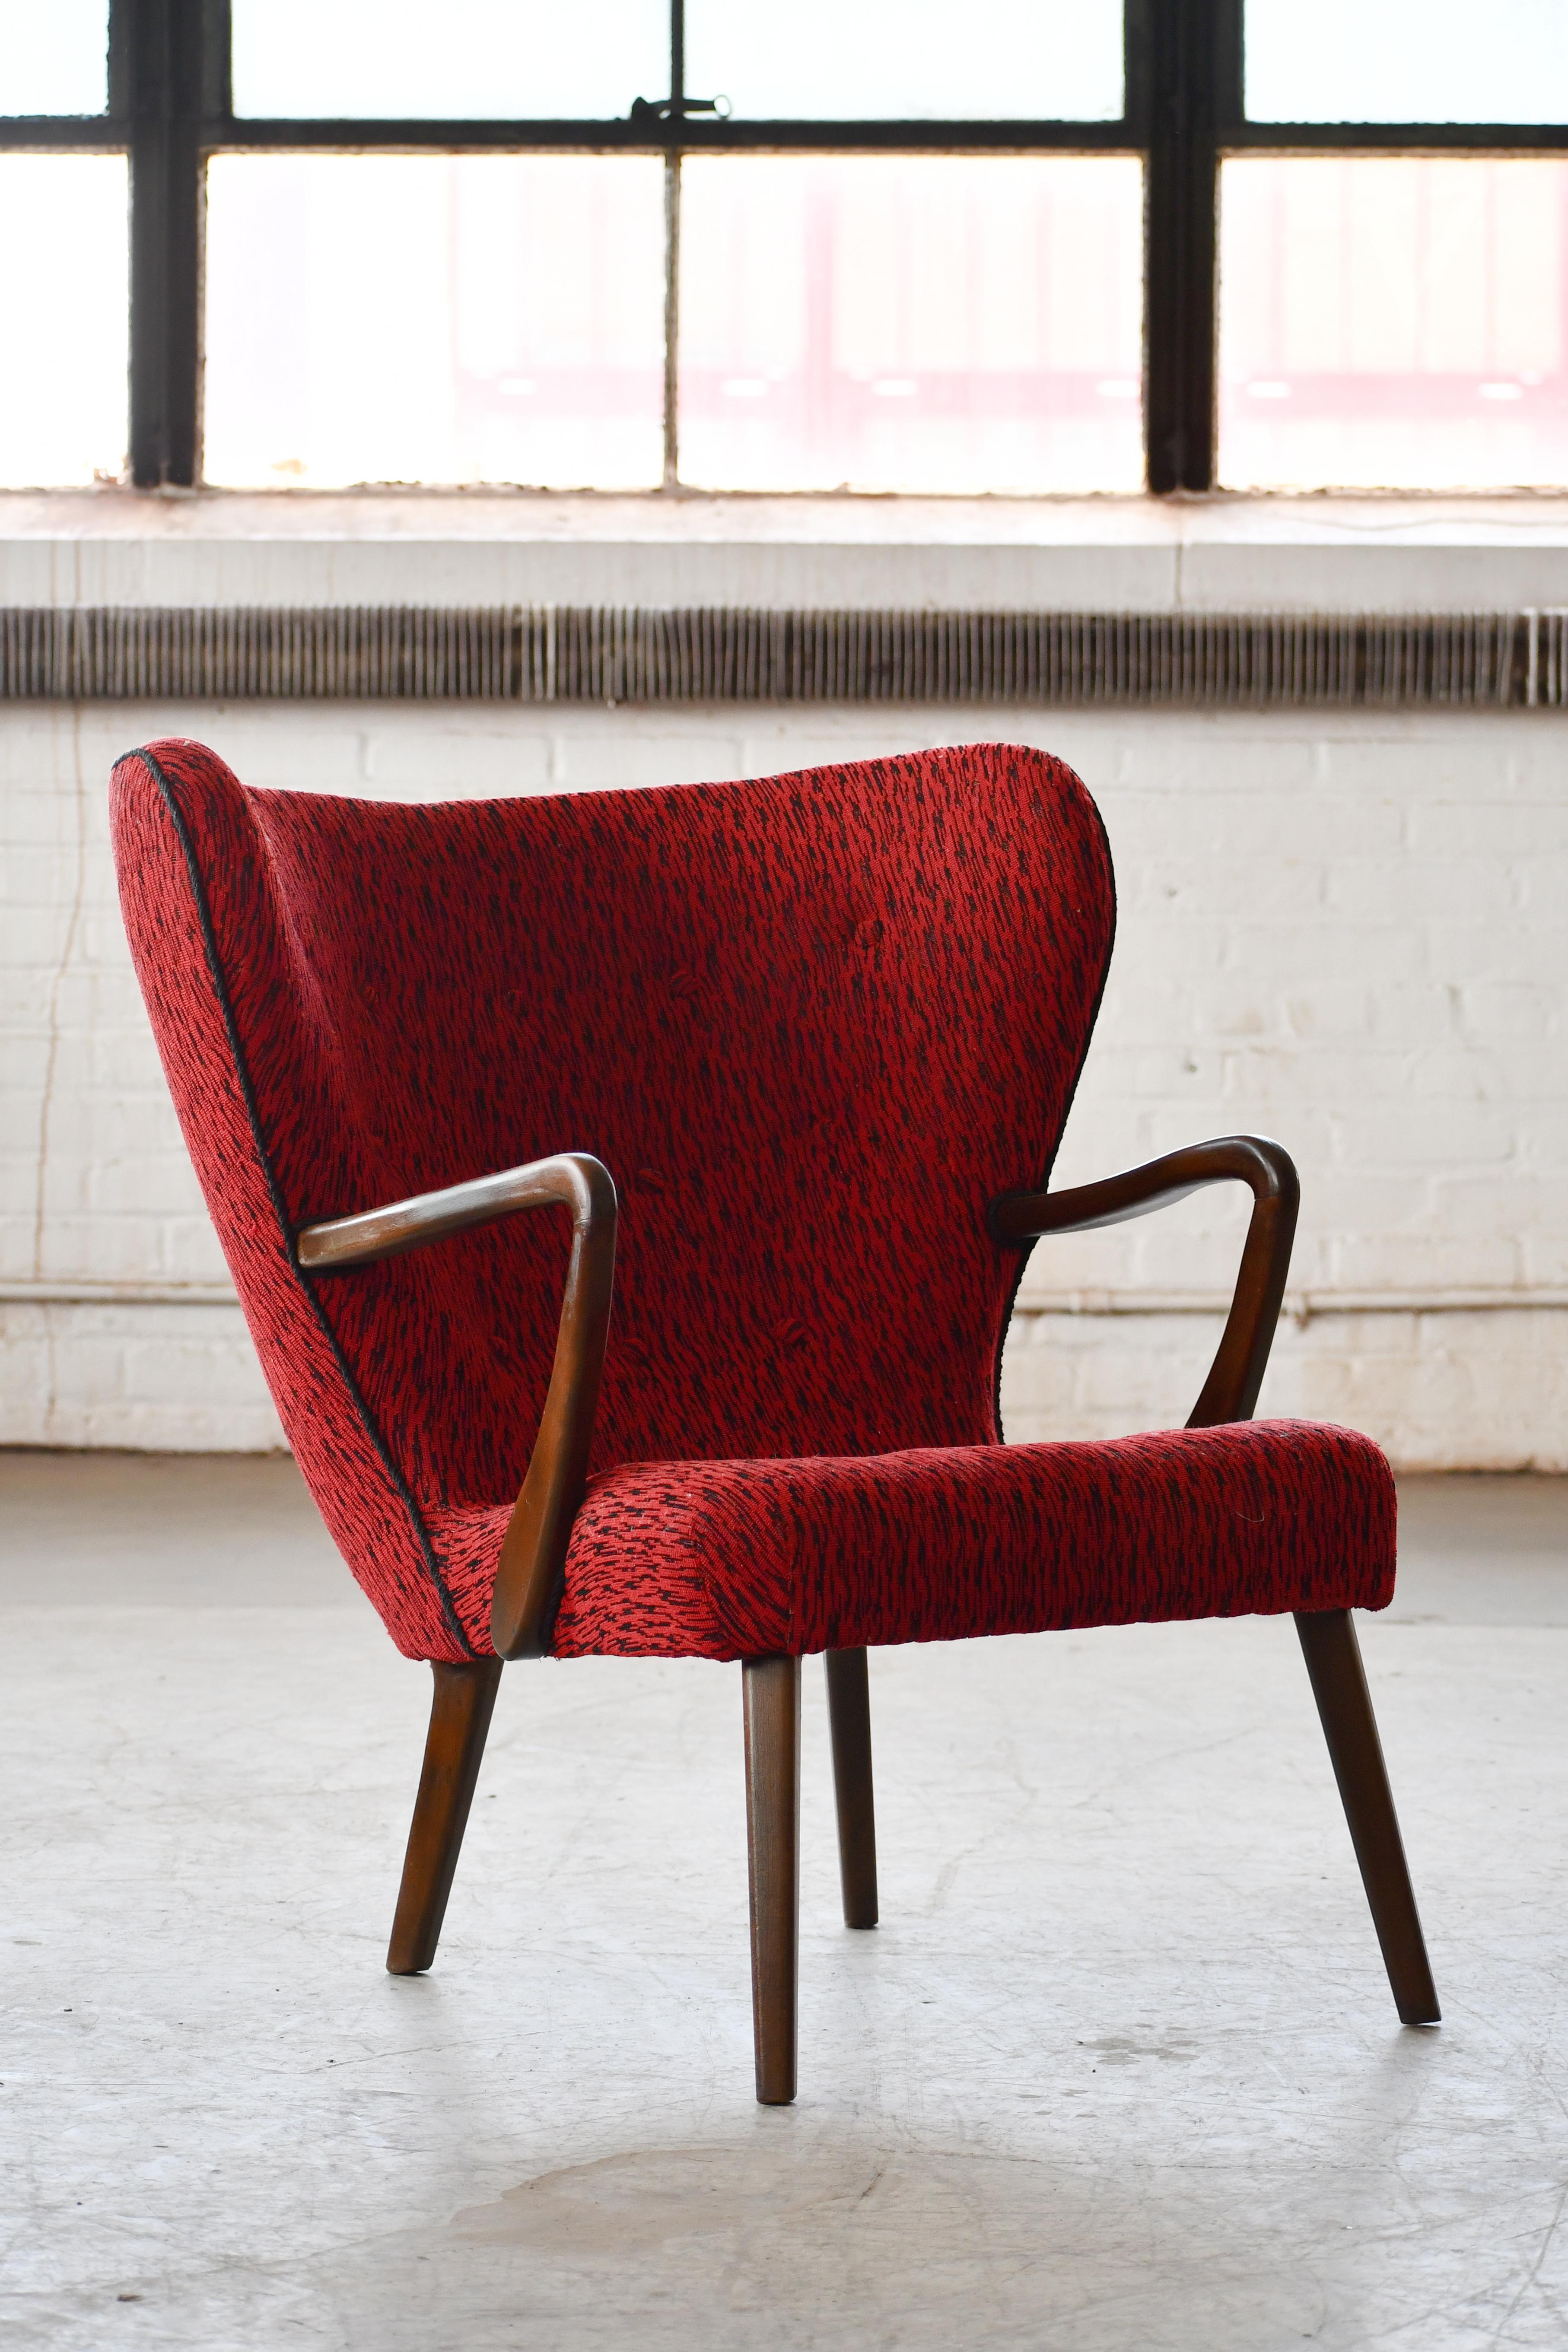 Ultra cool 1950's chair attributed to Danish designer duo Madsen & Schubell. The chair closely resembles the duo's famous 